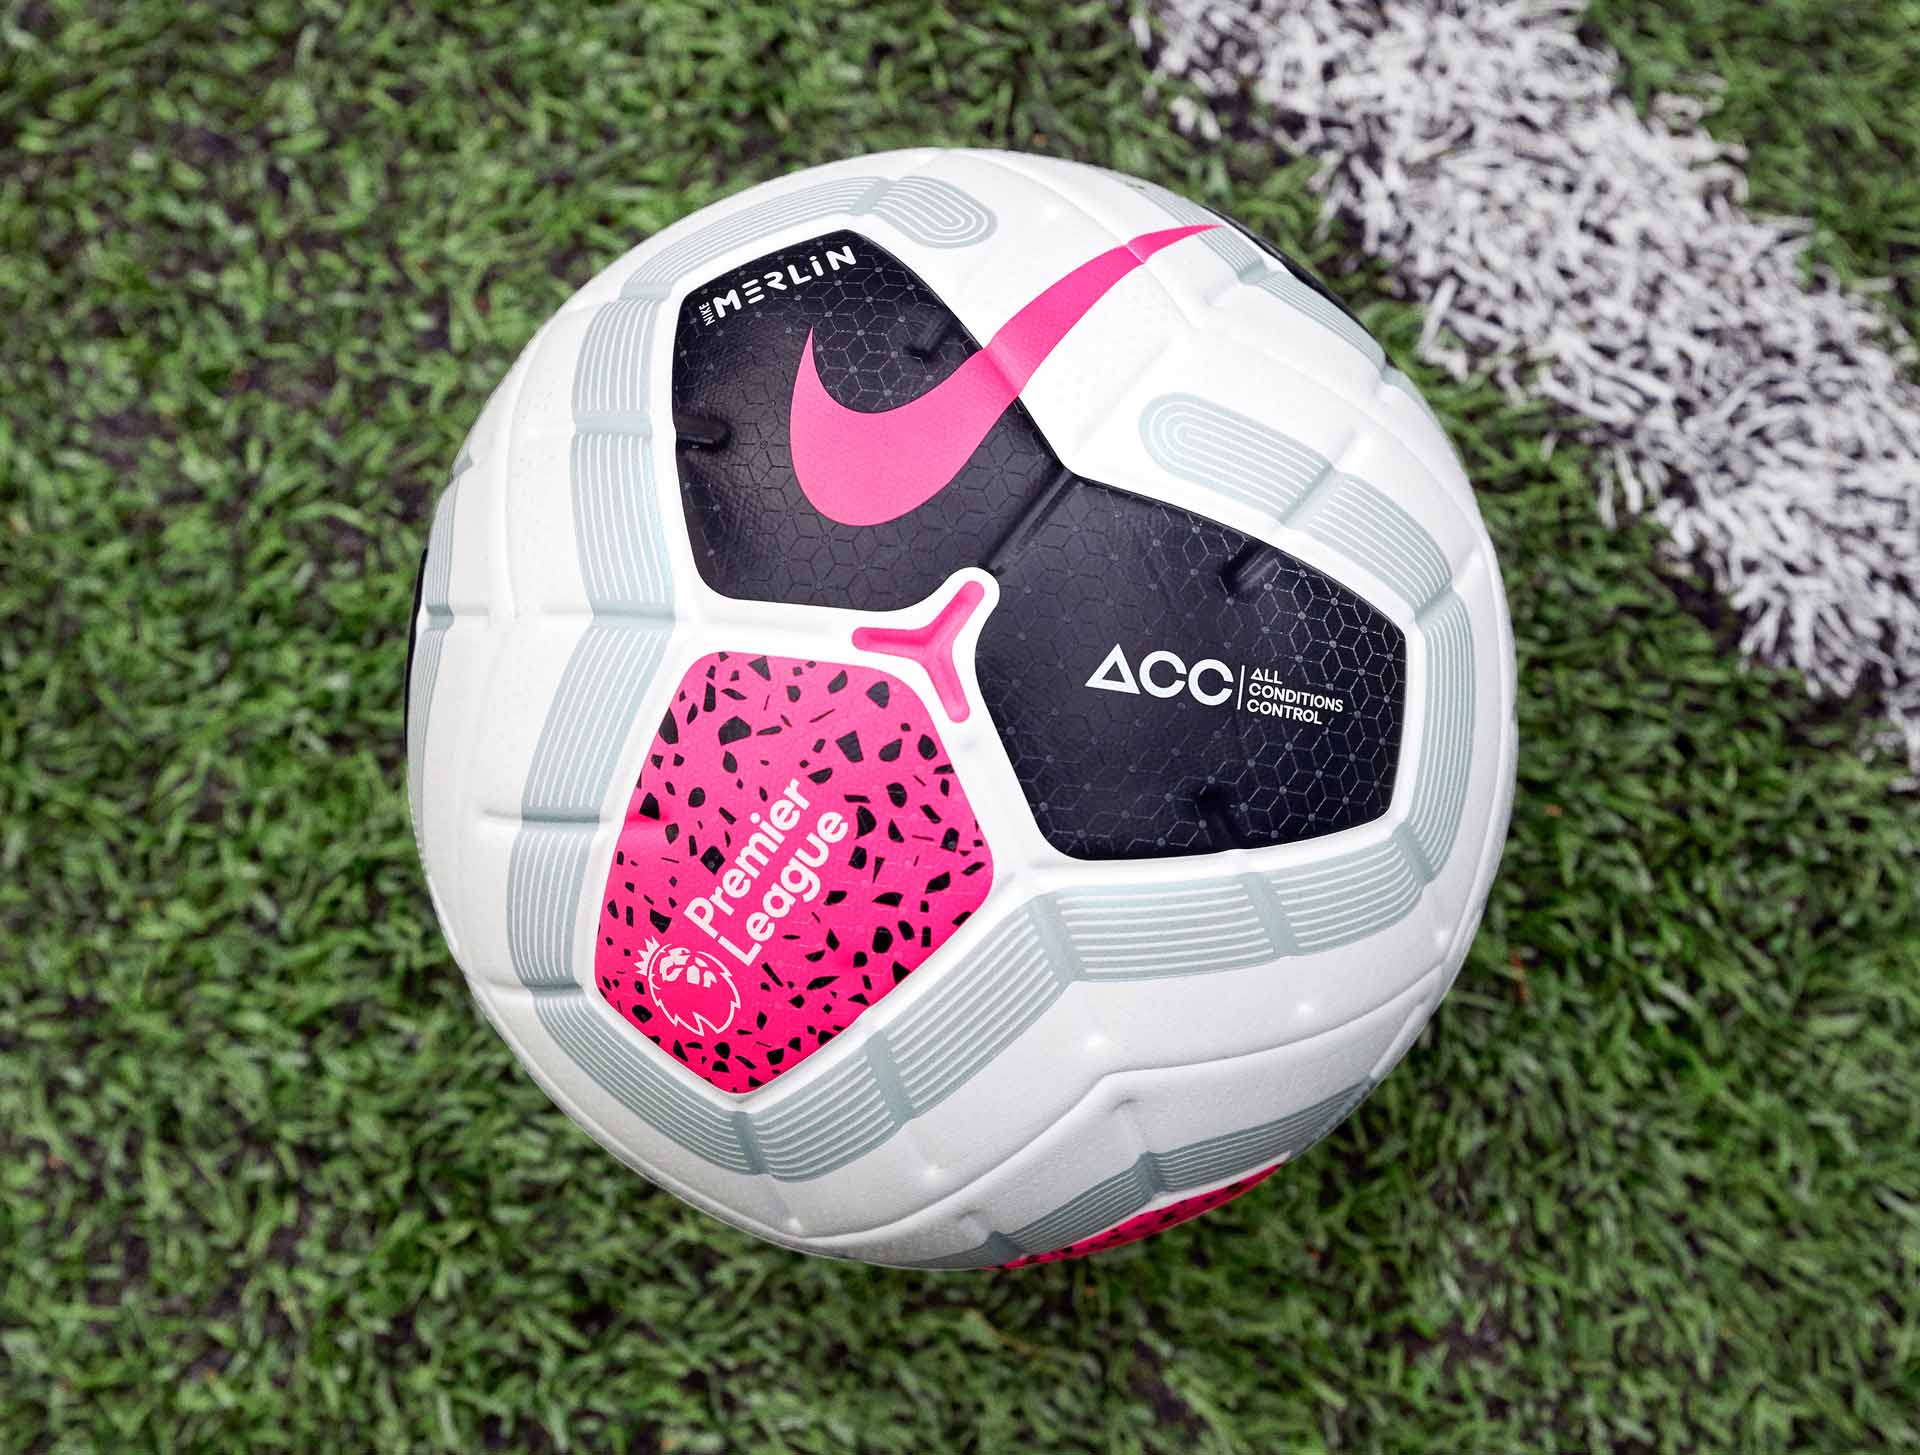 What ball does the premier league use